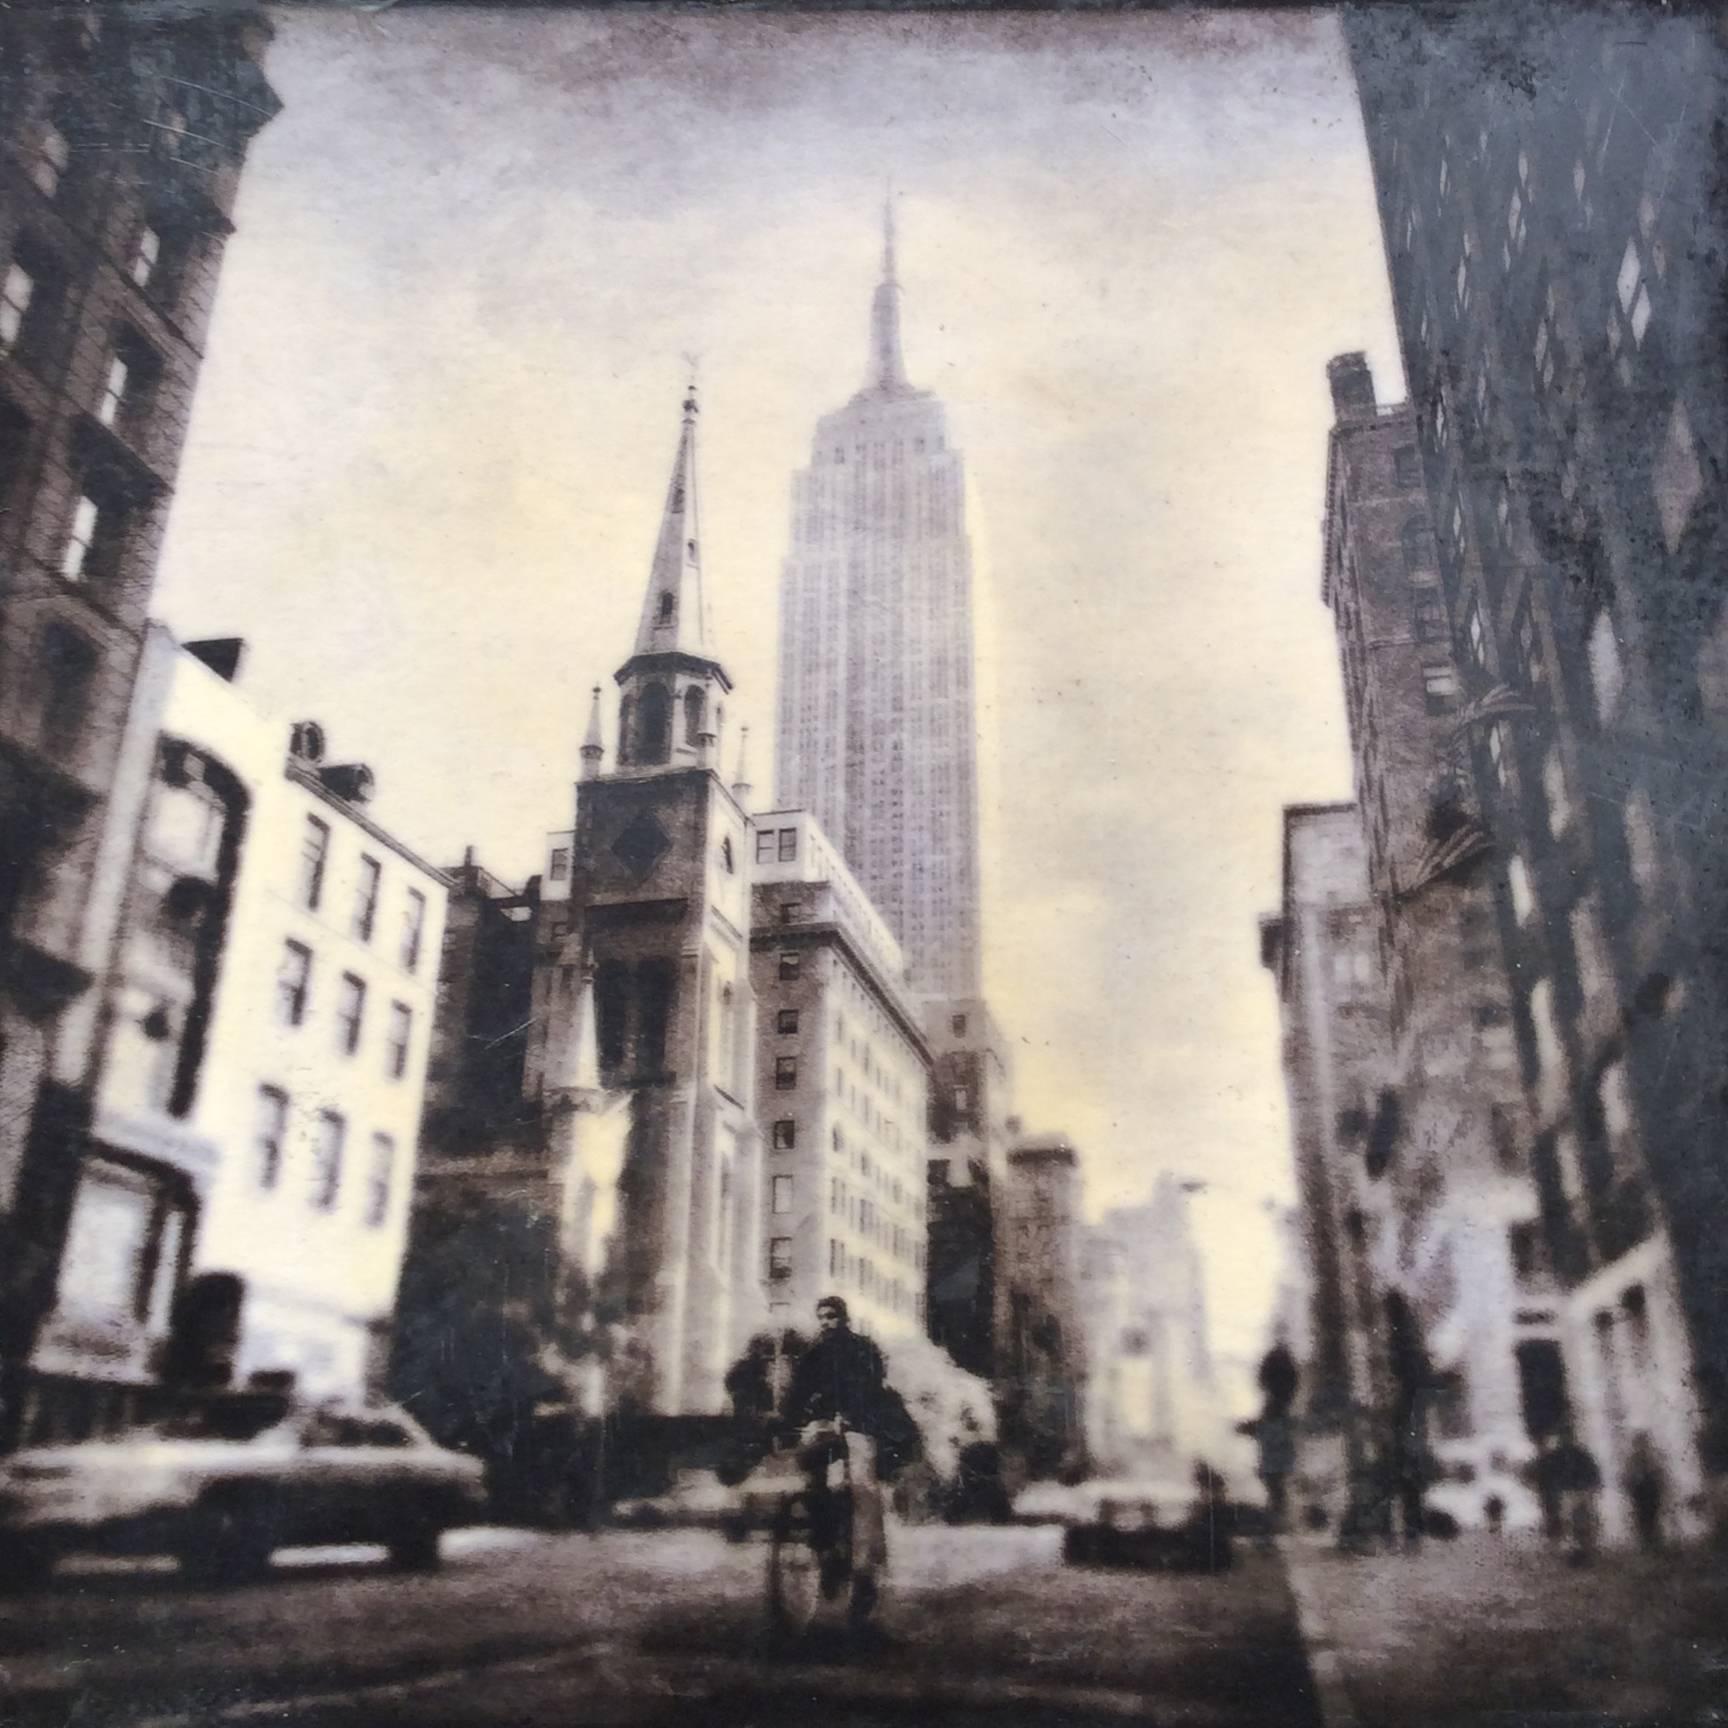 Peter Kelly Black and White Photograph - Bike with Empire, NY (Framed and Matted Photograph of Empire State Building)